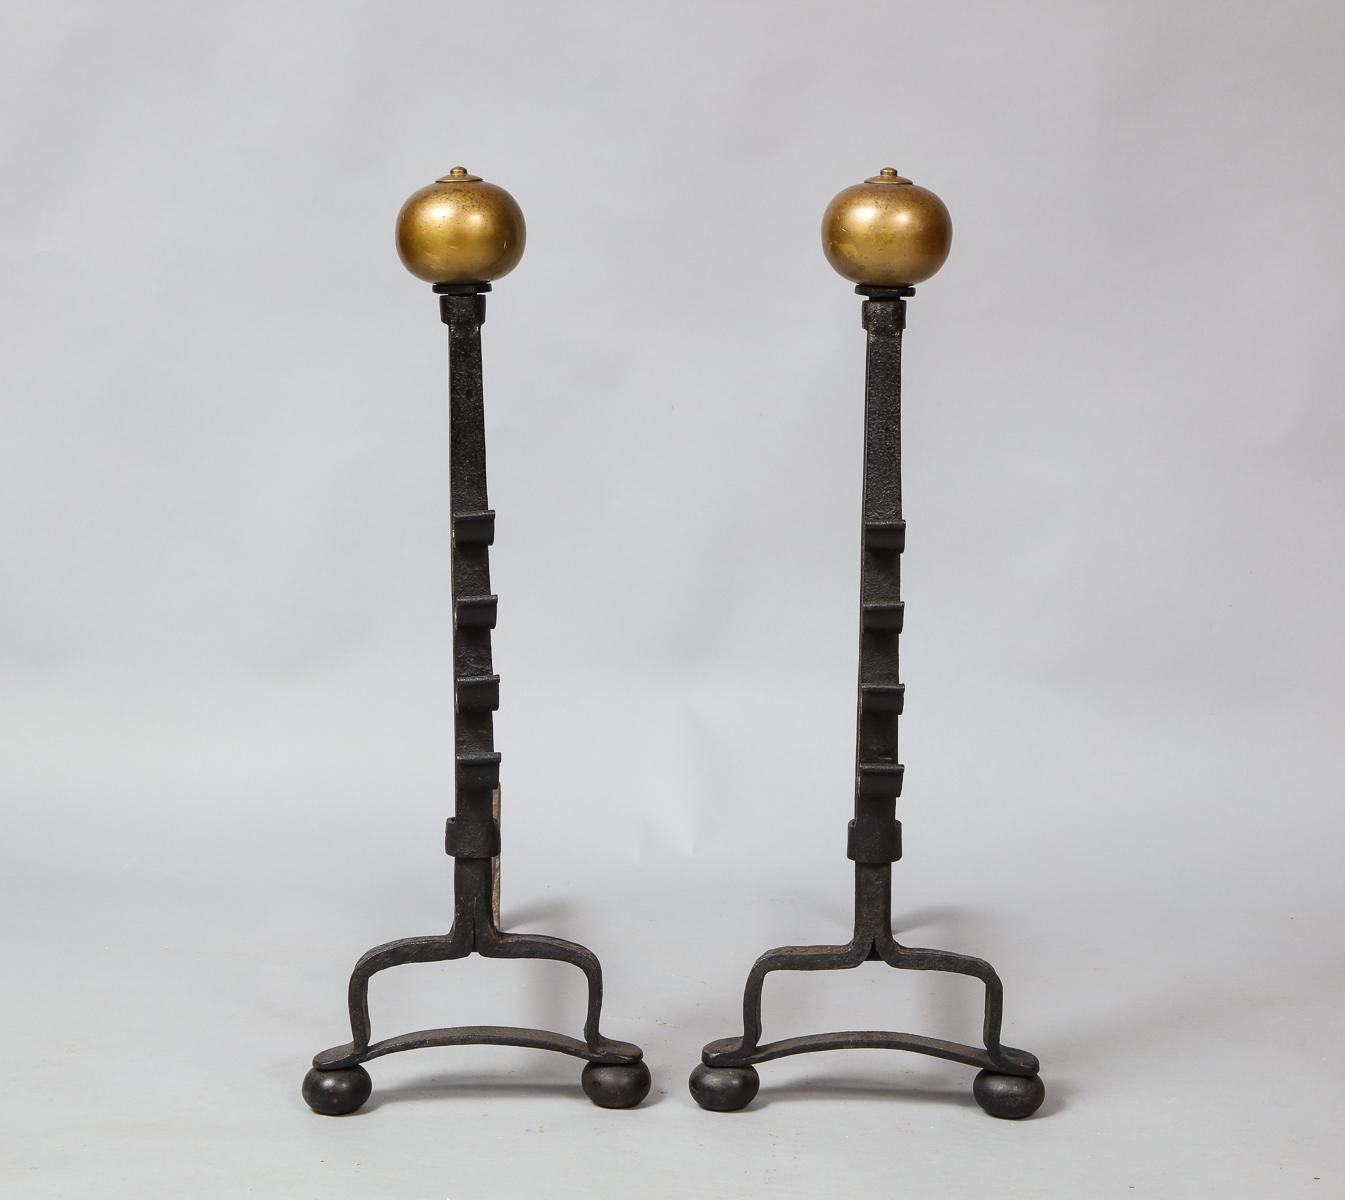 Good pair of 19th century bronze and wrought iron andirons, the suppressed ball tops with nipple finials, over square shafts each with four scrolled elements, the bases with arched legs joined by cross stretchers and standing on flattened ball feet.